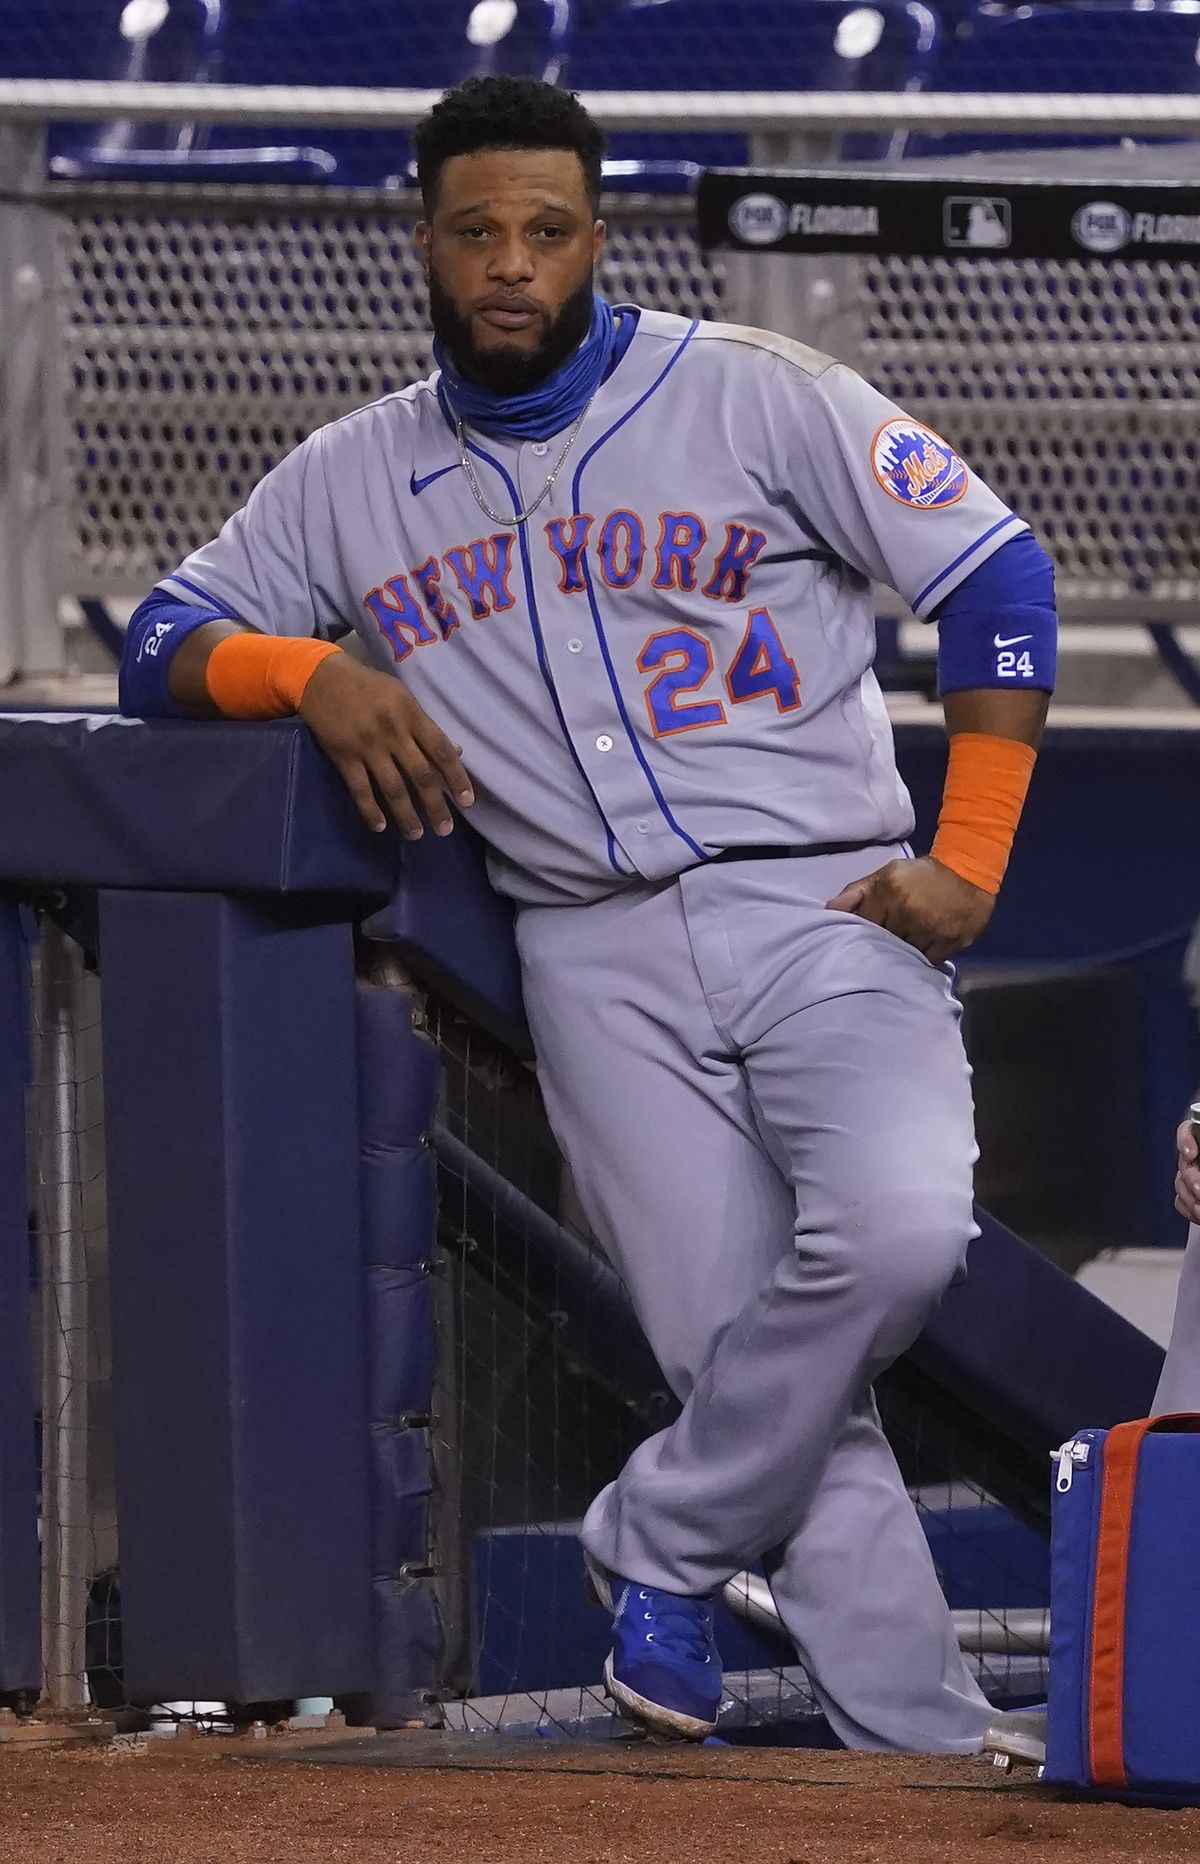 Robinson Cano #24 of the New York Mets looks on during the game against the Miami Marlins at Marlins Park on August 19, 2020 in Miami, Florida.